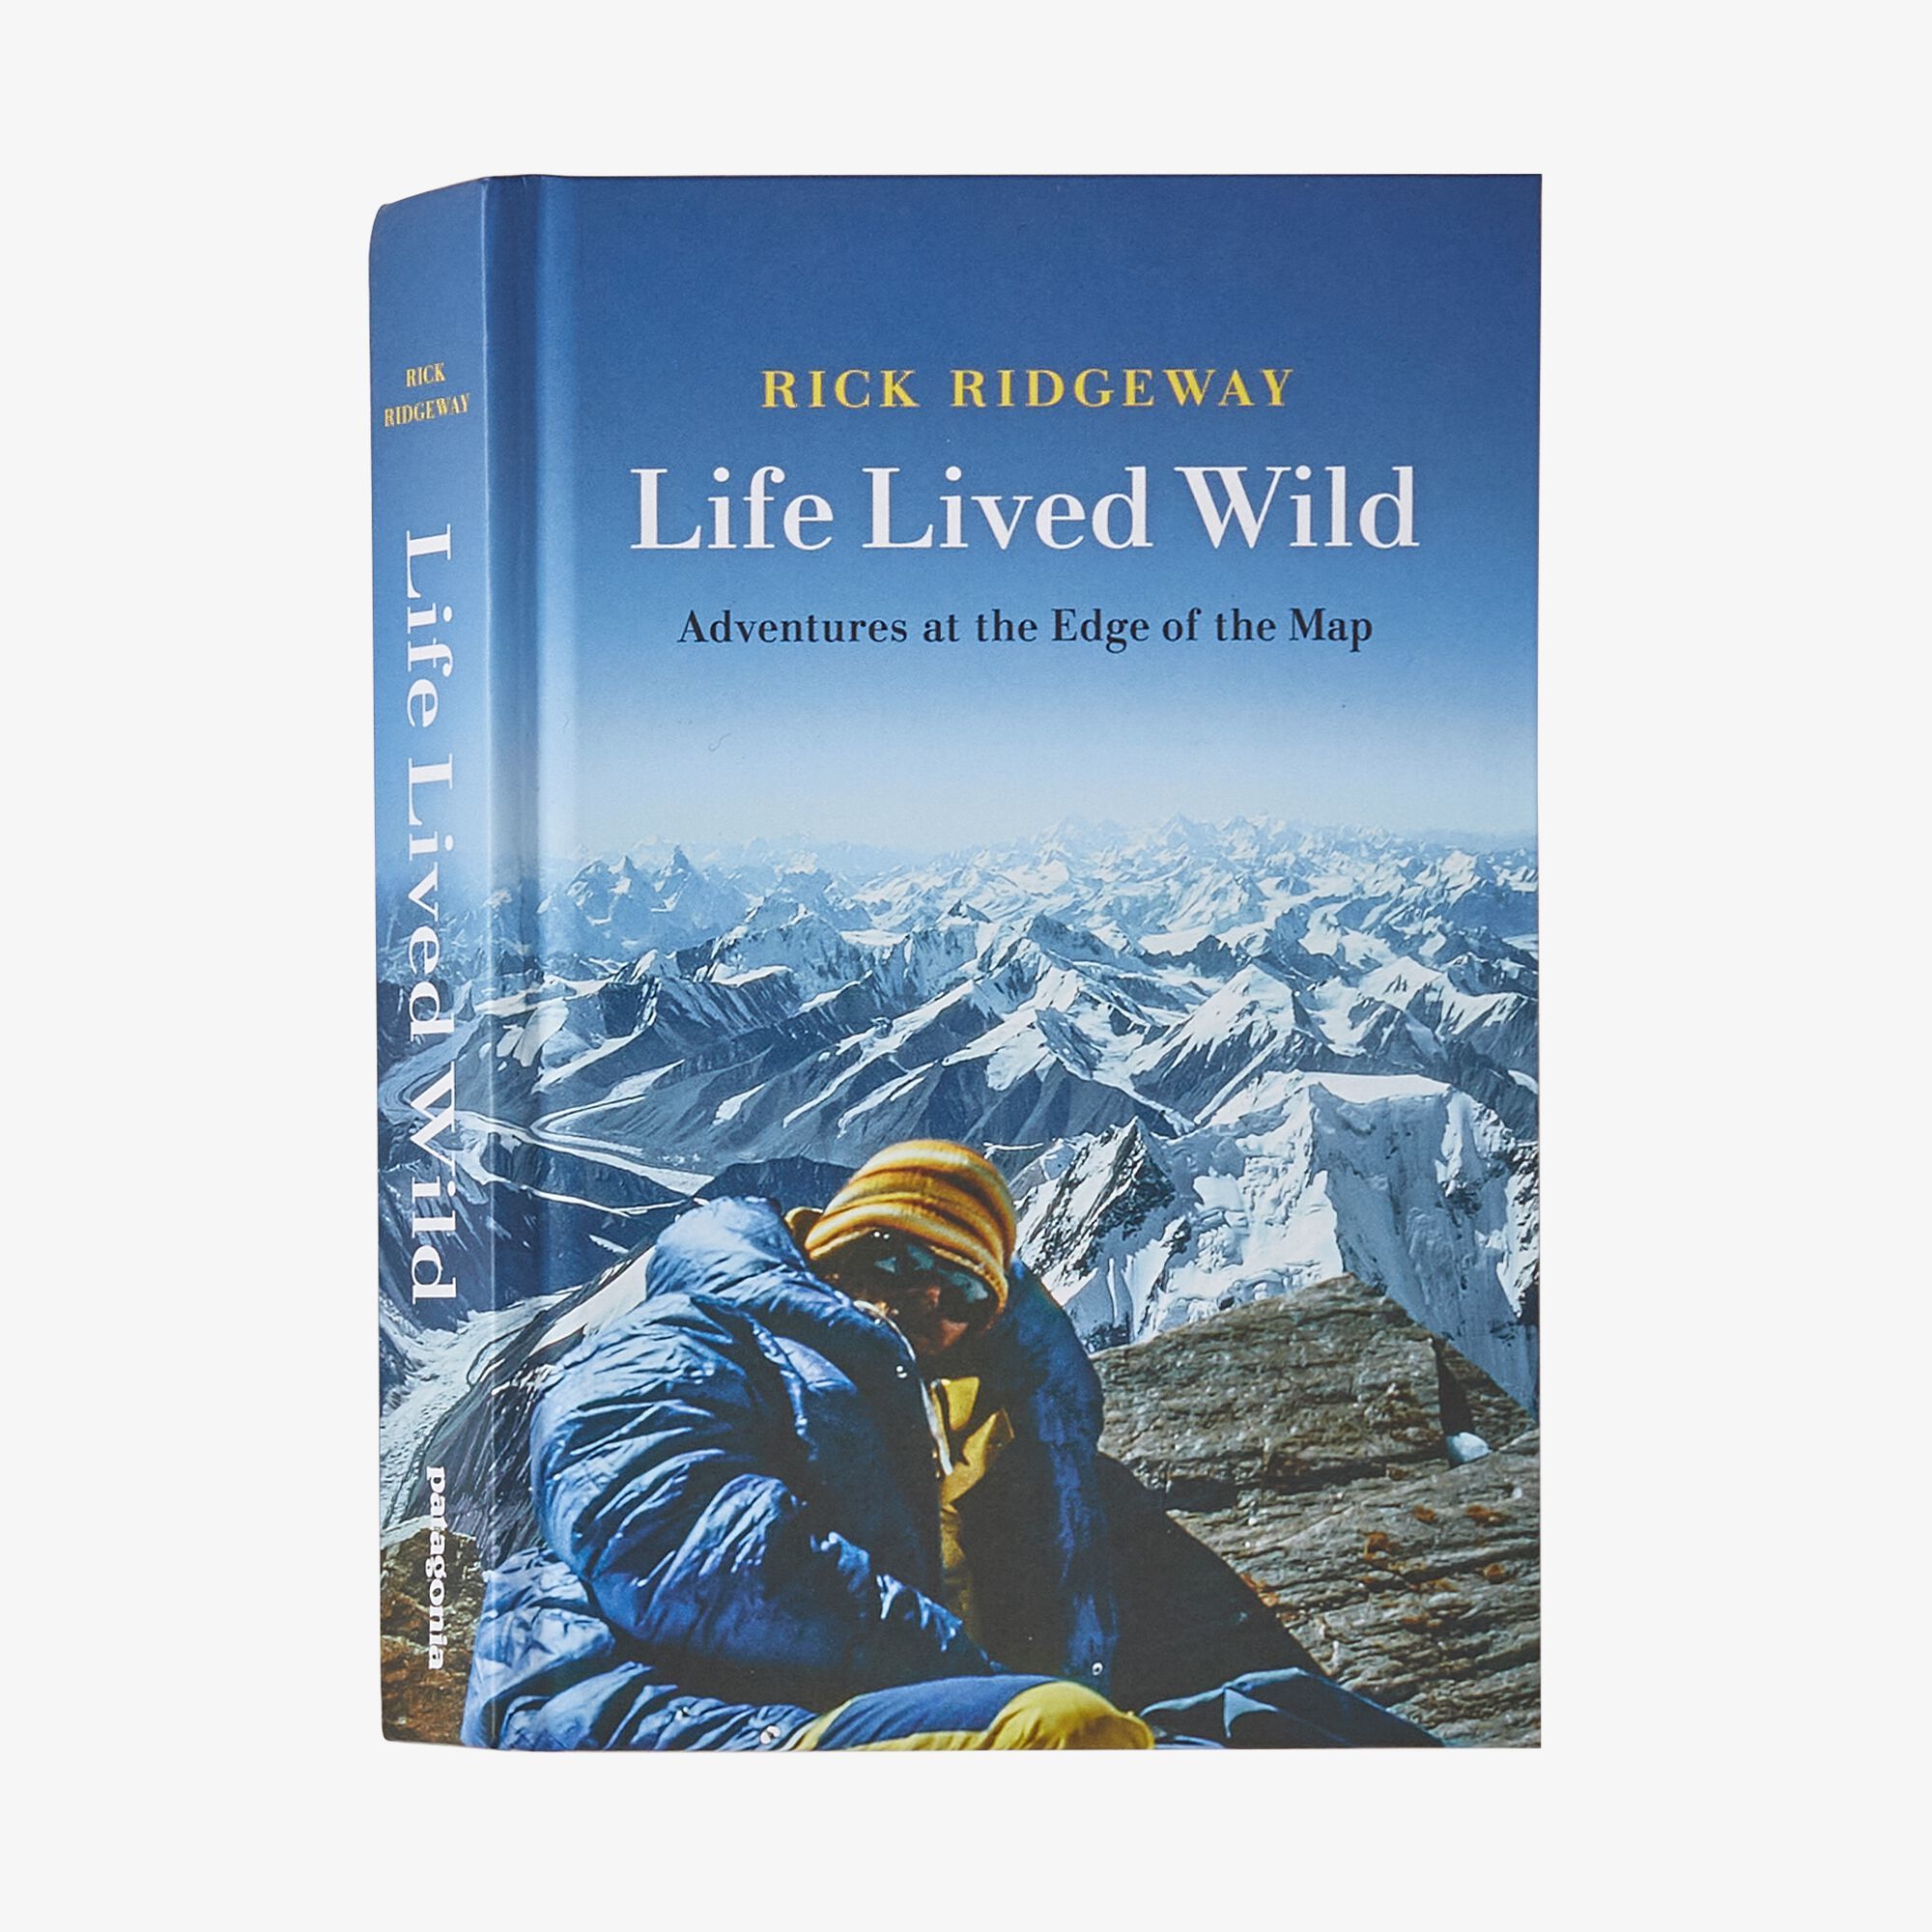 Rick Ridgeway, Life Lived Wild: Adventures at the Edge of the Map.